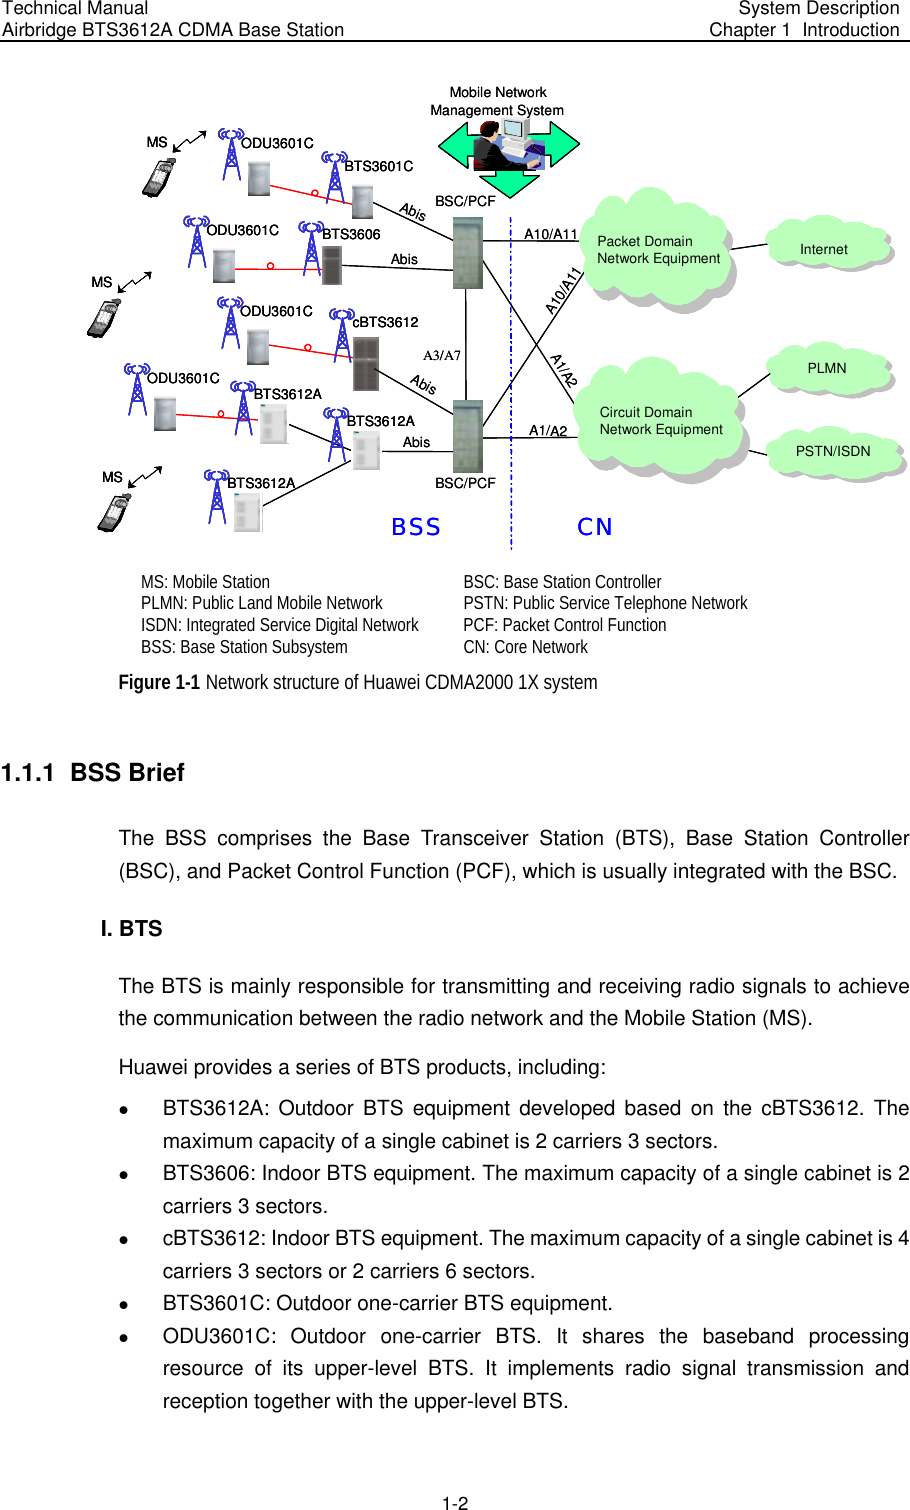 Technical Manual Airbridge BTS3612A CDMA Base Station System Description Chapter 1  Introduction  1-2 InternetPSTN/ISDNPLMNA3/A7A1/A2A10/A11AbisA1/A2MSMobile NetworkManagement SystemBSC/PCFBSC/PCFMSMSPacket DomainNetwork EquipmentA10/A11AbisBTS3601CAbisBSS CNcBTS3612ODU3601CODU3601CODU3601CBTS3606BTS36 12ABTS3612ABTS3 6 12ABTS3612AODU3601CBTS36 12ABTS3612AAbisCircuit DomainNetwork EquipmentInternetPSTN/ISDNPLMNPLMNPLMNA3/A7A1/A2A10/A11AbisA1/A2MSMSMobile NetworkManagement SystemBSC/PCFBSC/PCFMSMSMSMSPacket DomainNetwork EquipmentA10/A11AbisBTS3601CBTS3601CAbisBSS CNcBTS3612cBTS3612ODU3601CODU3601CODU3601CODU3601CODU3601CODU3601CBTS3606BTS3606BTS36 12ABTS3612ABTS36 12ABTS3612ABTS3 6 12ABTS3612ABTS3 6 12ABTS3612AODU3601CODU3601CBTS36 12ABTS3612ABTS36 12ABTS3612AAbisCircuit DomainNetwork Equipment MS: Mobile Station  BSC: Base Station Controller PLMN: Public Land Mobile Network   PSTN: Public Service Telephone Network ISDN: Integrated Service Digital Network  PCF: Packet Control Function BSS: Base Station Subsystem  CN: Core Network  Figure 1-1 Network structure of Huawei CDMA2000 1X system 1.1.1  BSS Brief The BSS comprises the Base Transceiver Station (BTS), Base Station Controller (BSC), and Packet Control Function (PCF), which is usually integrated with the BSC. I. BTS The BTS is mainly responsible for transmitting and receiving radio signals to achieve the communication between the radio network and the Mobile Station (MS).  Huawei provides a series of BTS products, including: z BTS3612A: Outdoor BTS equipment developed based on the cBTS3612. The maximum capacity of a single cabinet is 2 carriers 3 sectors. z BTS3606: Indoor BTS equipment. The maximum capacity of a single cabinet is 2 carriers 3 sectors. z cBTS3612: Indoor BTS equipment. The maximum capacity of a single cabinet is 4 carriers 3 sectors or 2 carriers 6 sectors. z BTS3601C: Outdoor one-carrier BTS equipment. z ODU3601C: Outdoor one-carrier BTS. It shares the baseband processing resource of its upper-level BTS. It implements radio signal transmission and reception together with the upper-level BTS. 